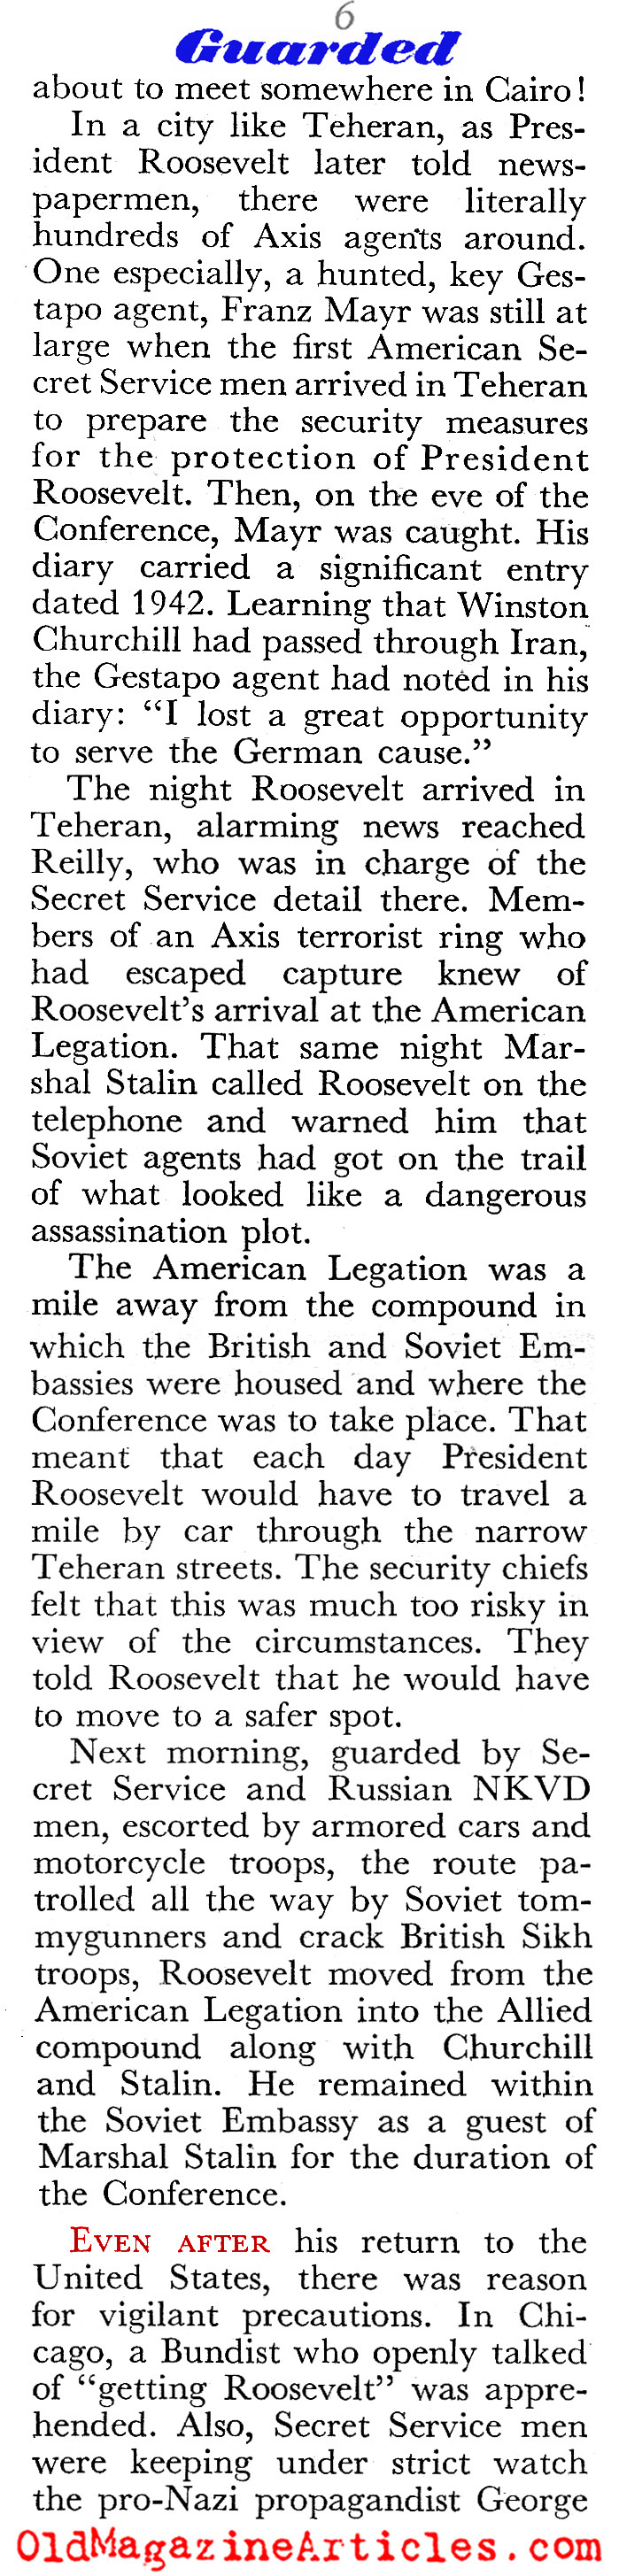 They Protected FDR (Coronet Magazine, 1945)